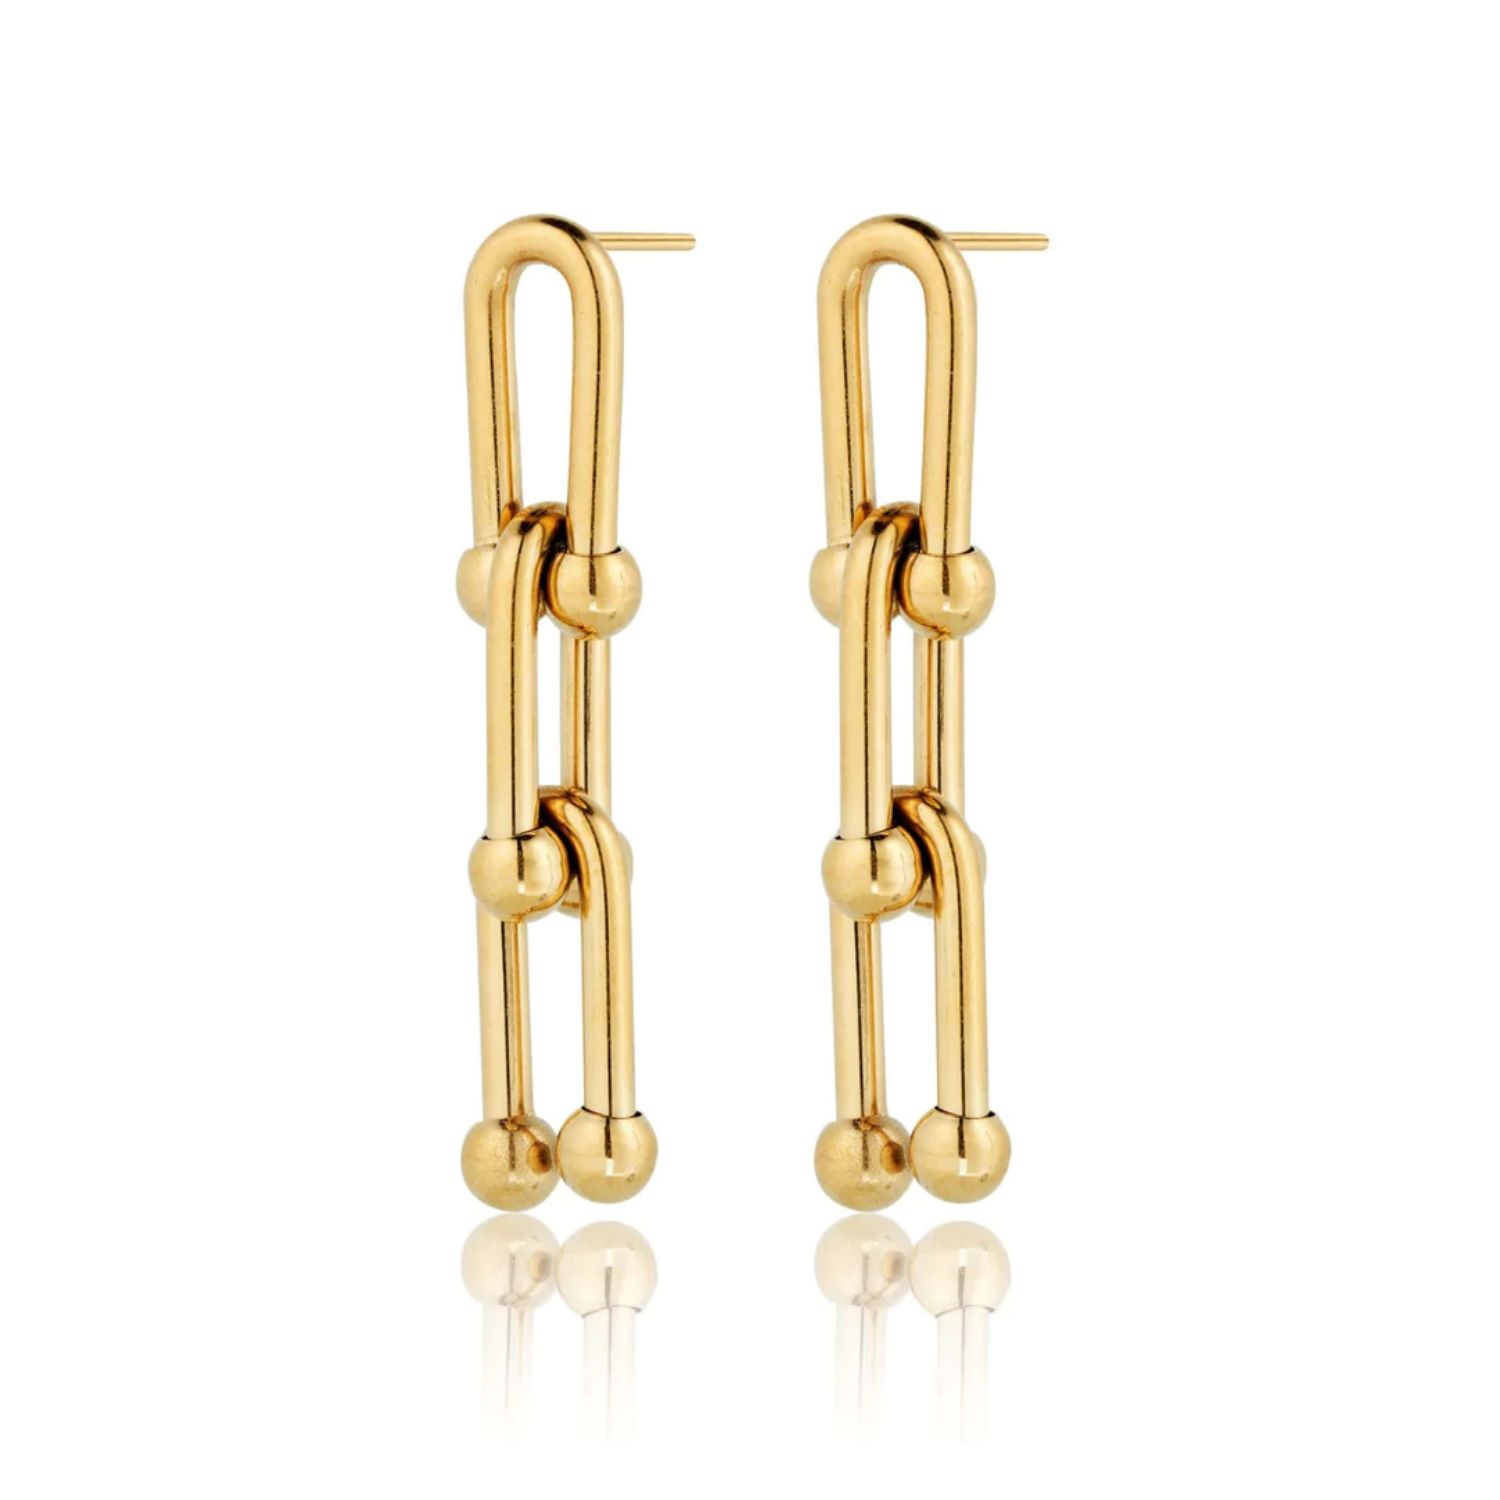 Gold Tiffany link earrings. These earrings are made of high-quality materials. Their gold-plated brass shines beautifully. They look good with any outfit, whether it's for a special occasion or your everyday clothes. These earrings will be an excellent addition to your jewelry collection.